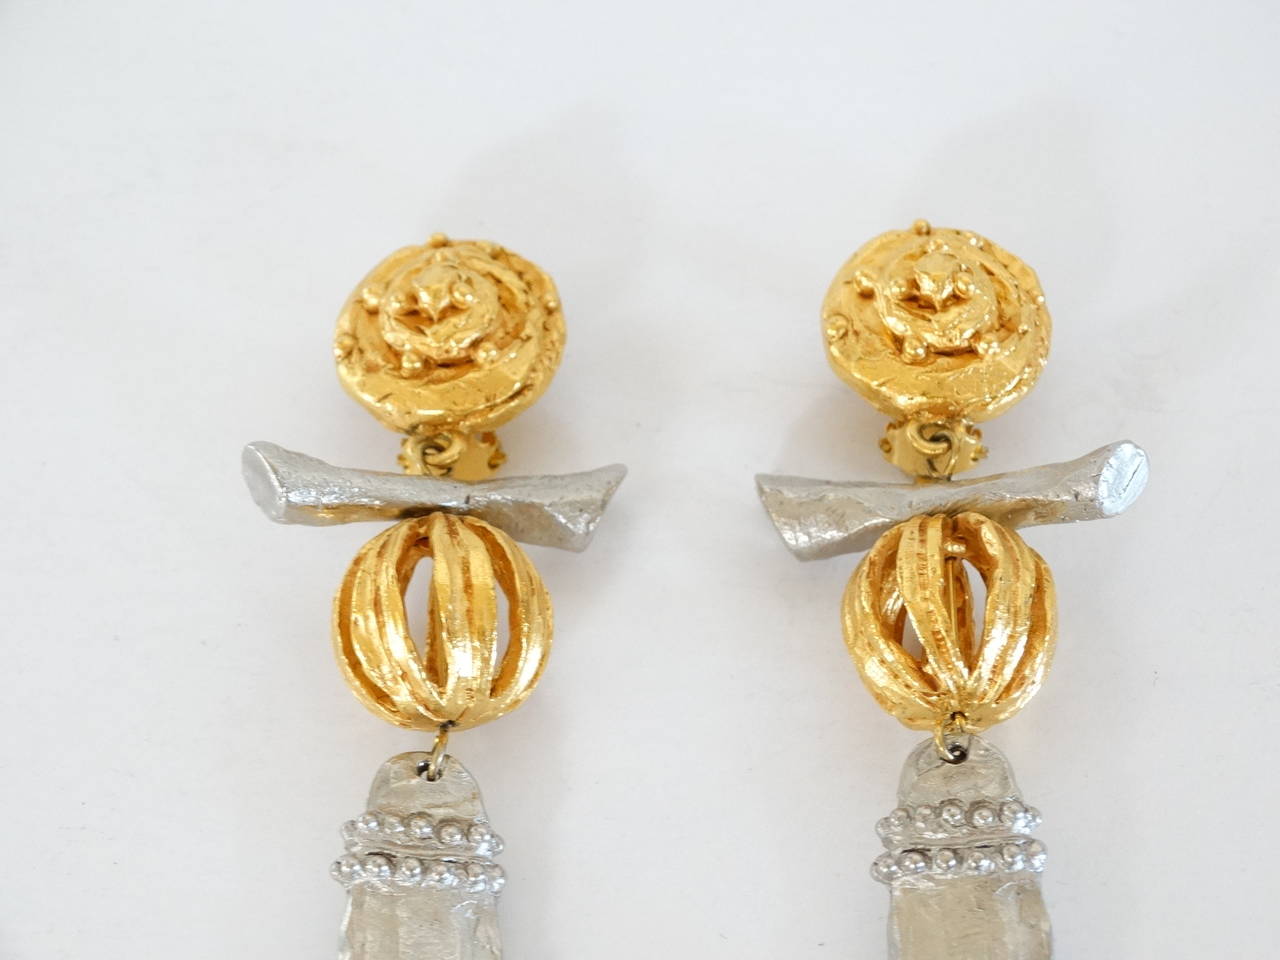 Beautiful and Bold Vintage CHRISTIAN LACROIX Asian Flare Drop clip Earrings! This is a fabulous gold tone with silver clip earring with a Asian flare
( at least to me). The earrings are light in weight and measure 4inches long. In mint vintage